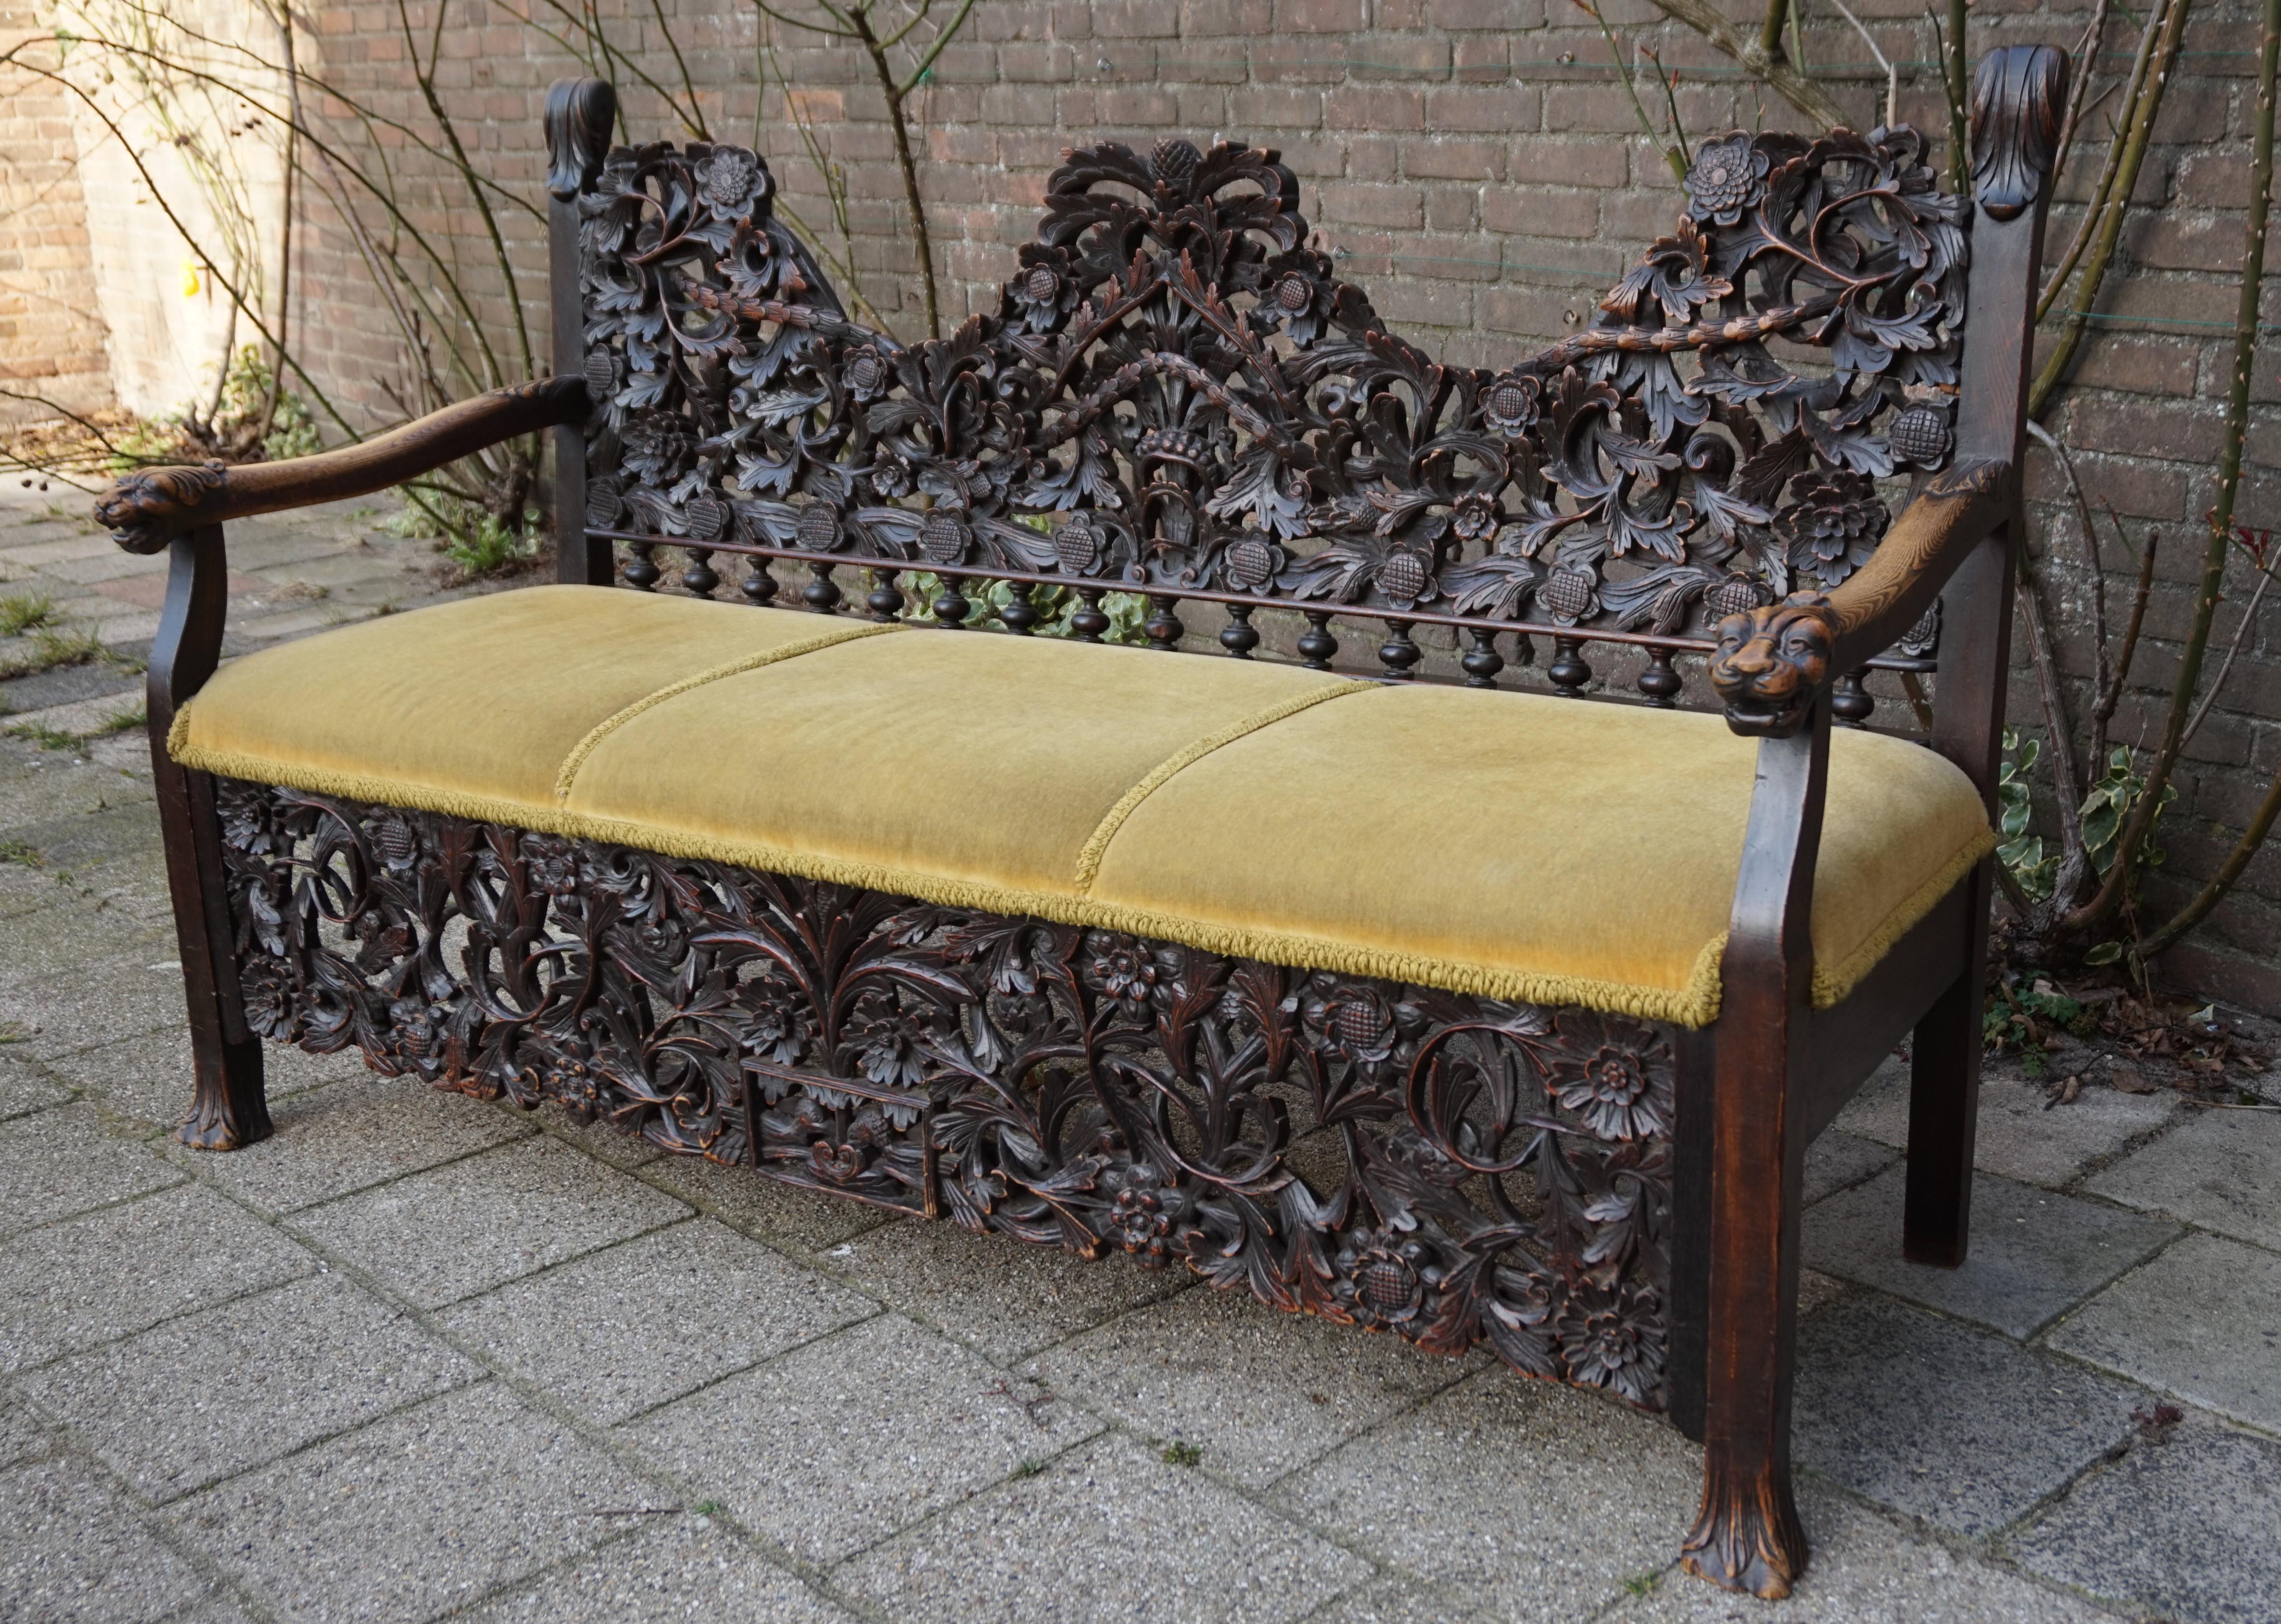 Stunning 19th century Dutch Colonial settee with tree of life symbolism and more.

If you are looking for unique and amazing antiques then this one of a kind settee with its meaningful carvings could be perfect for decorating your home or business.